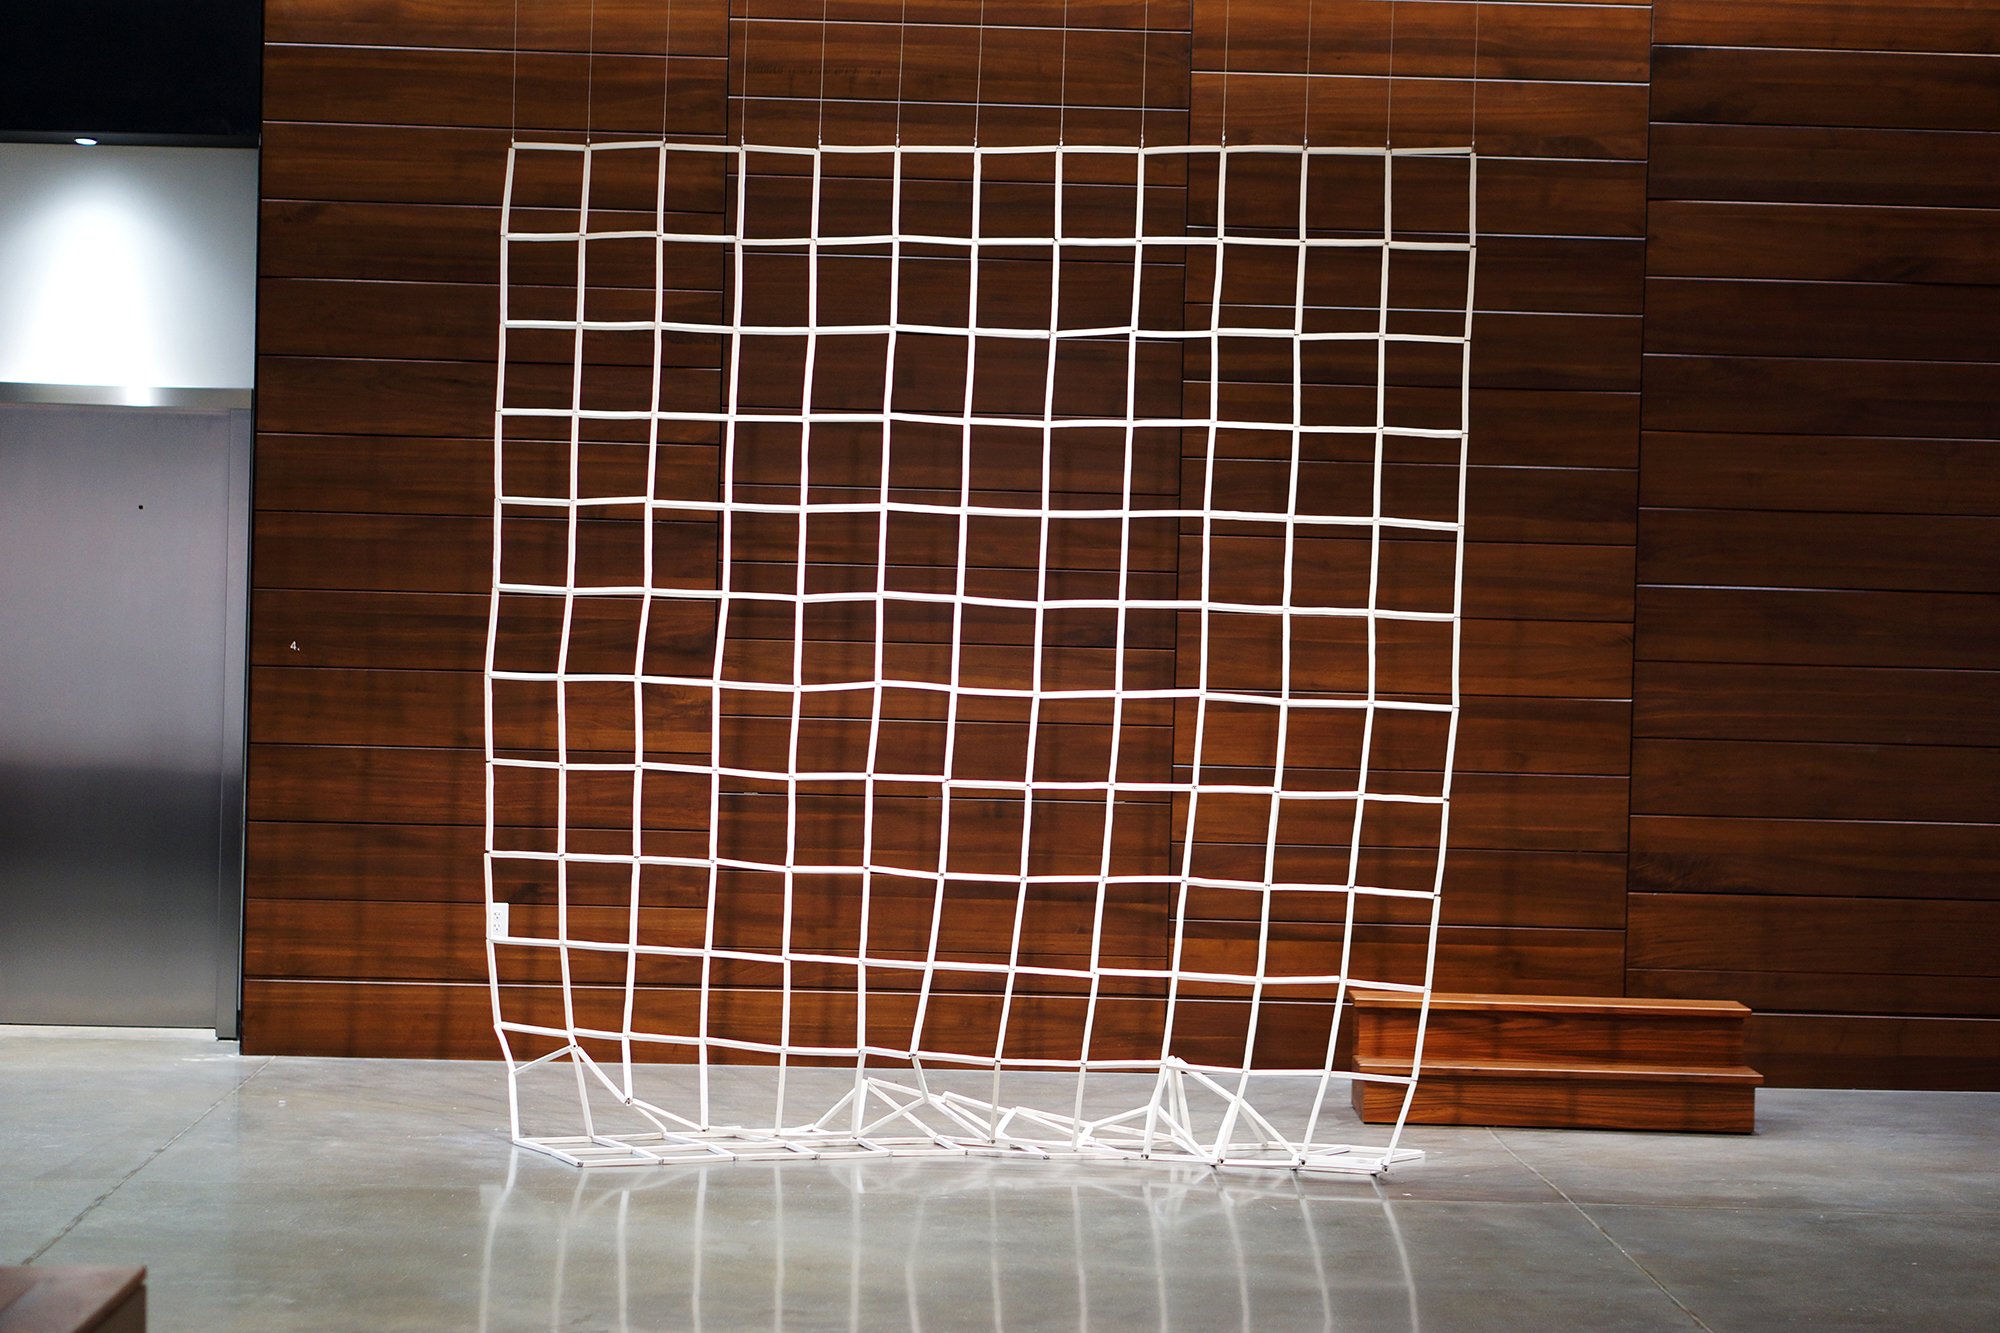  Free standing grid sculpture created by Lauren HB Studio available for commission and display 